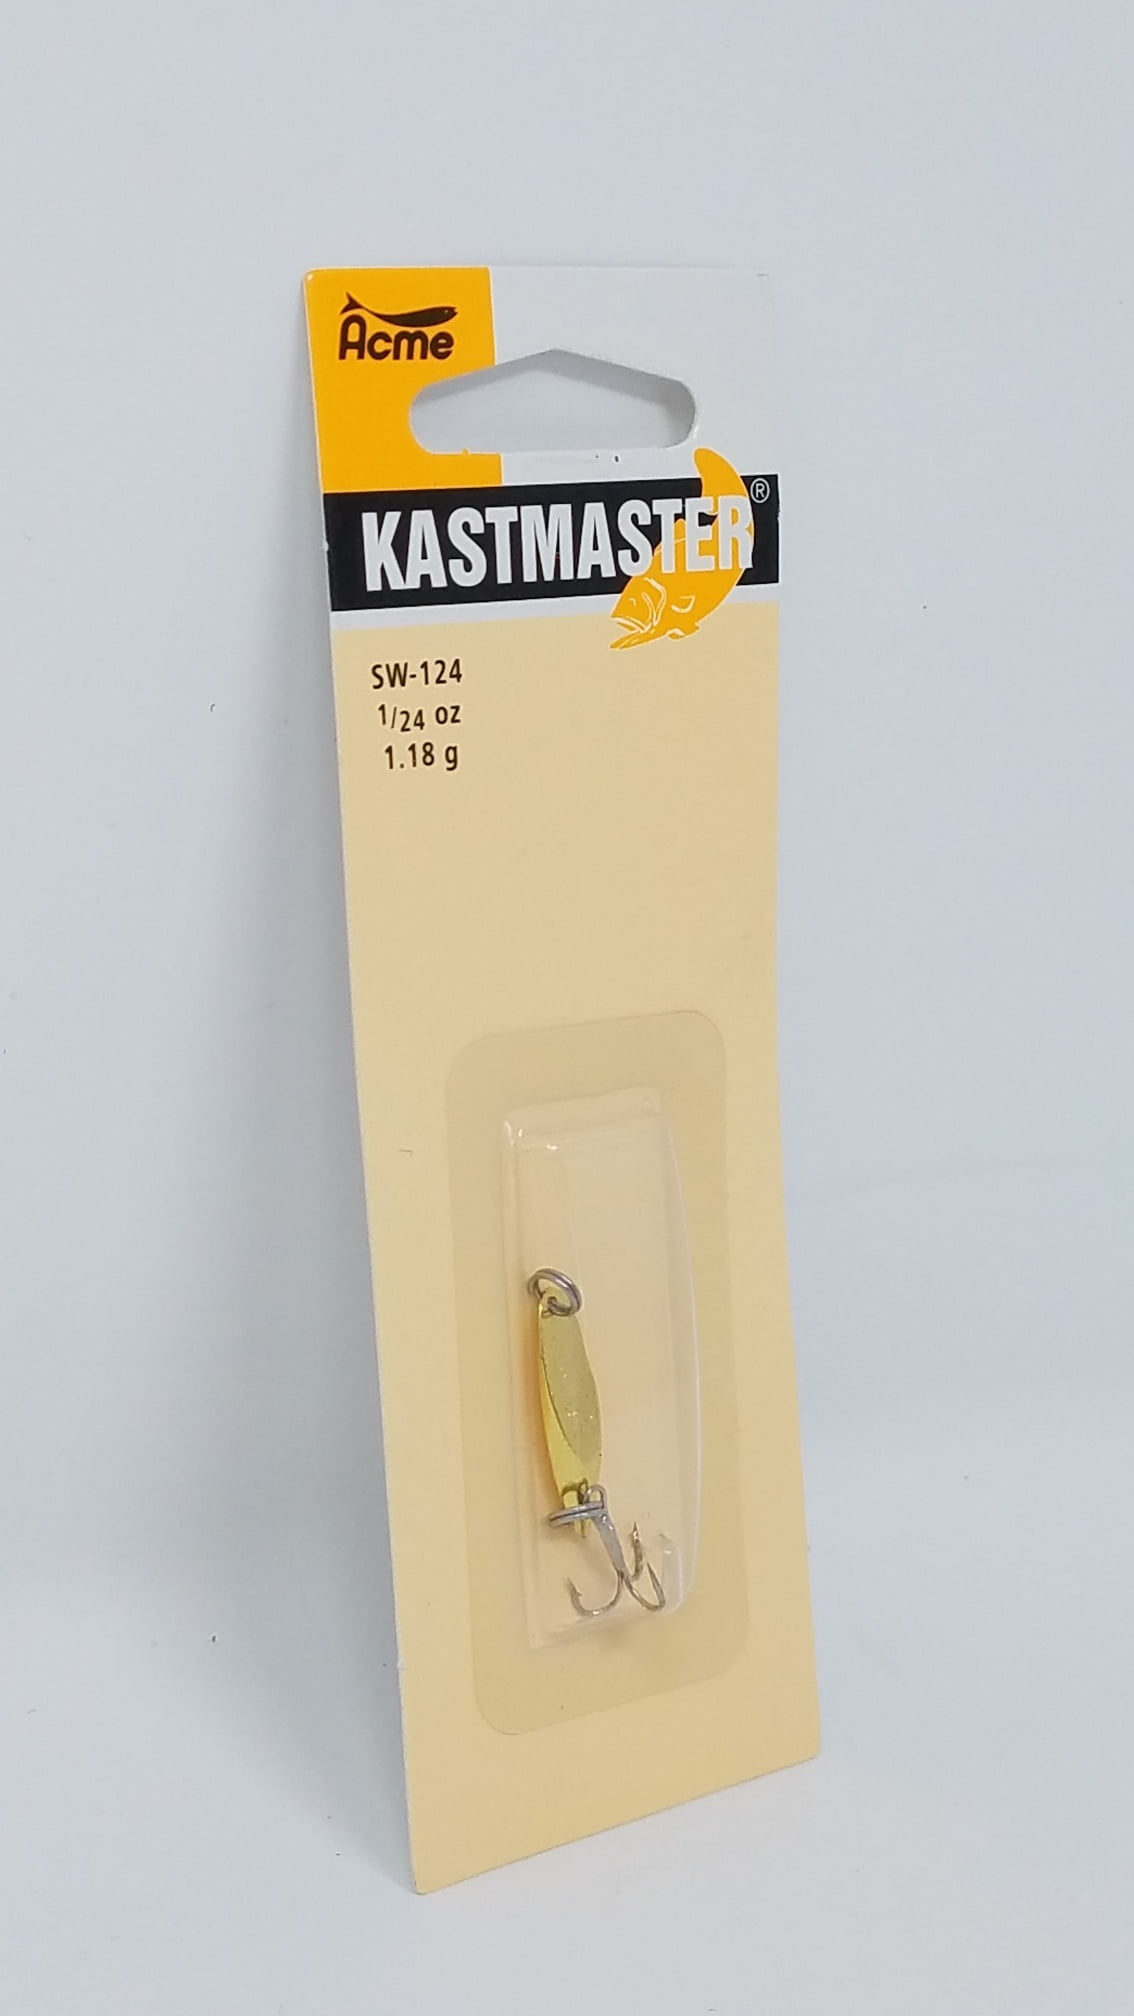 Acme Tackle Kastmaster Fishing Lure Spoon Gold 1/24 oz. 